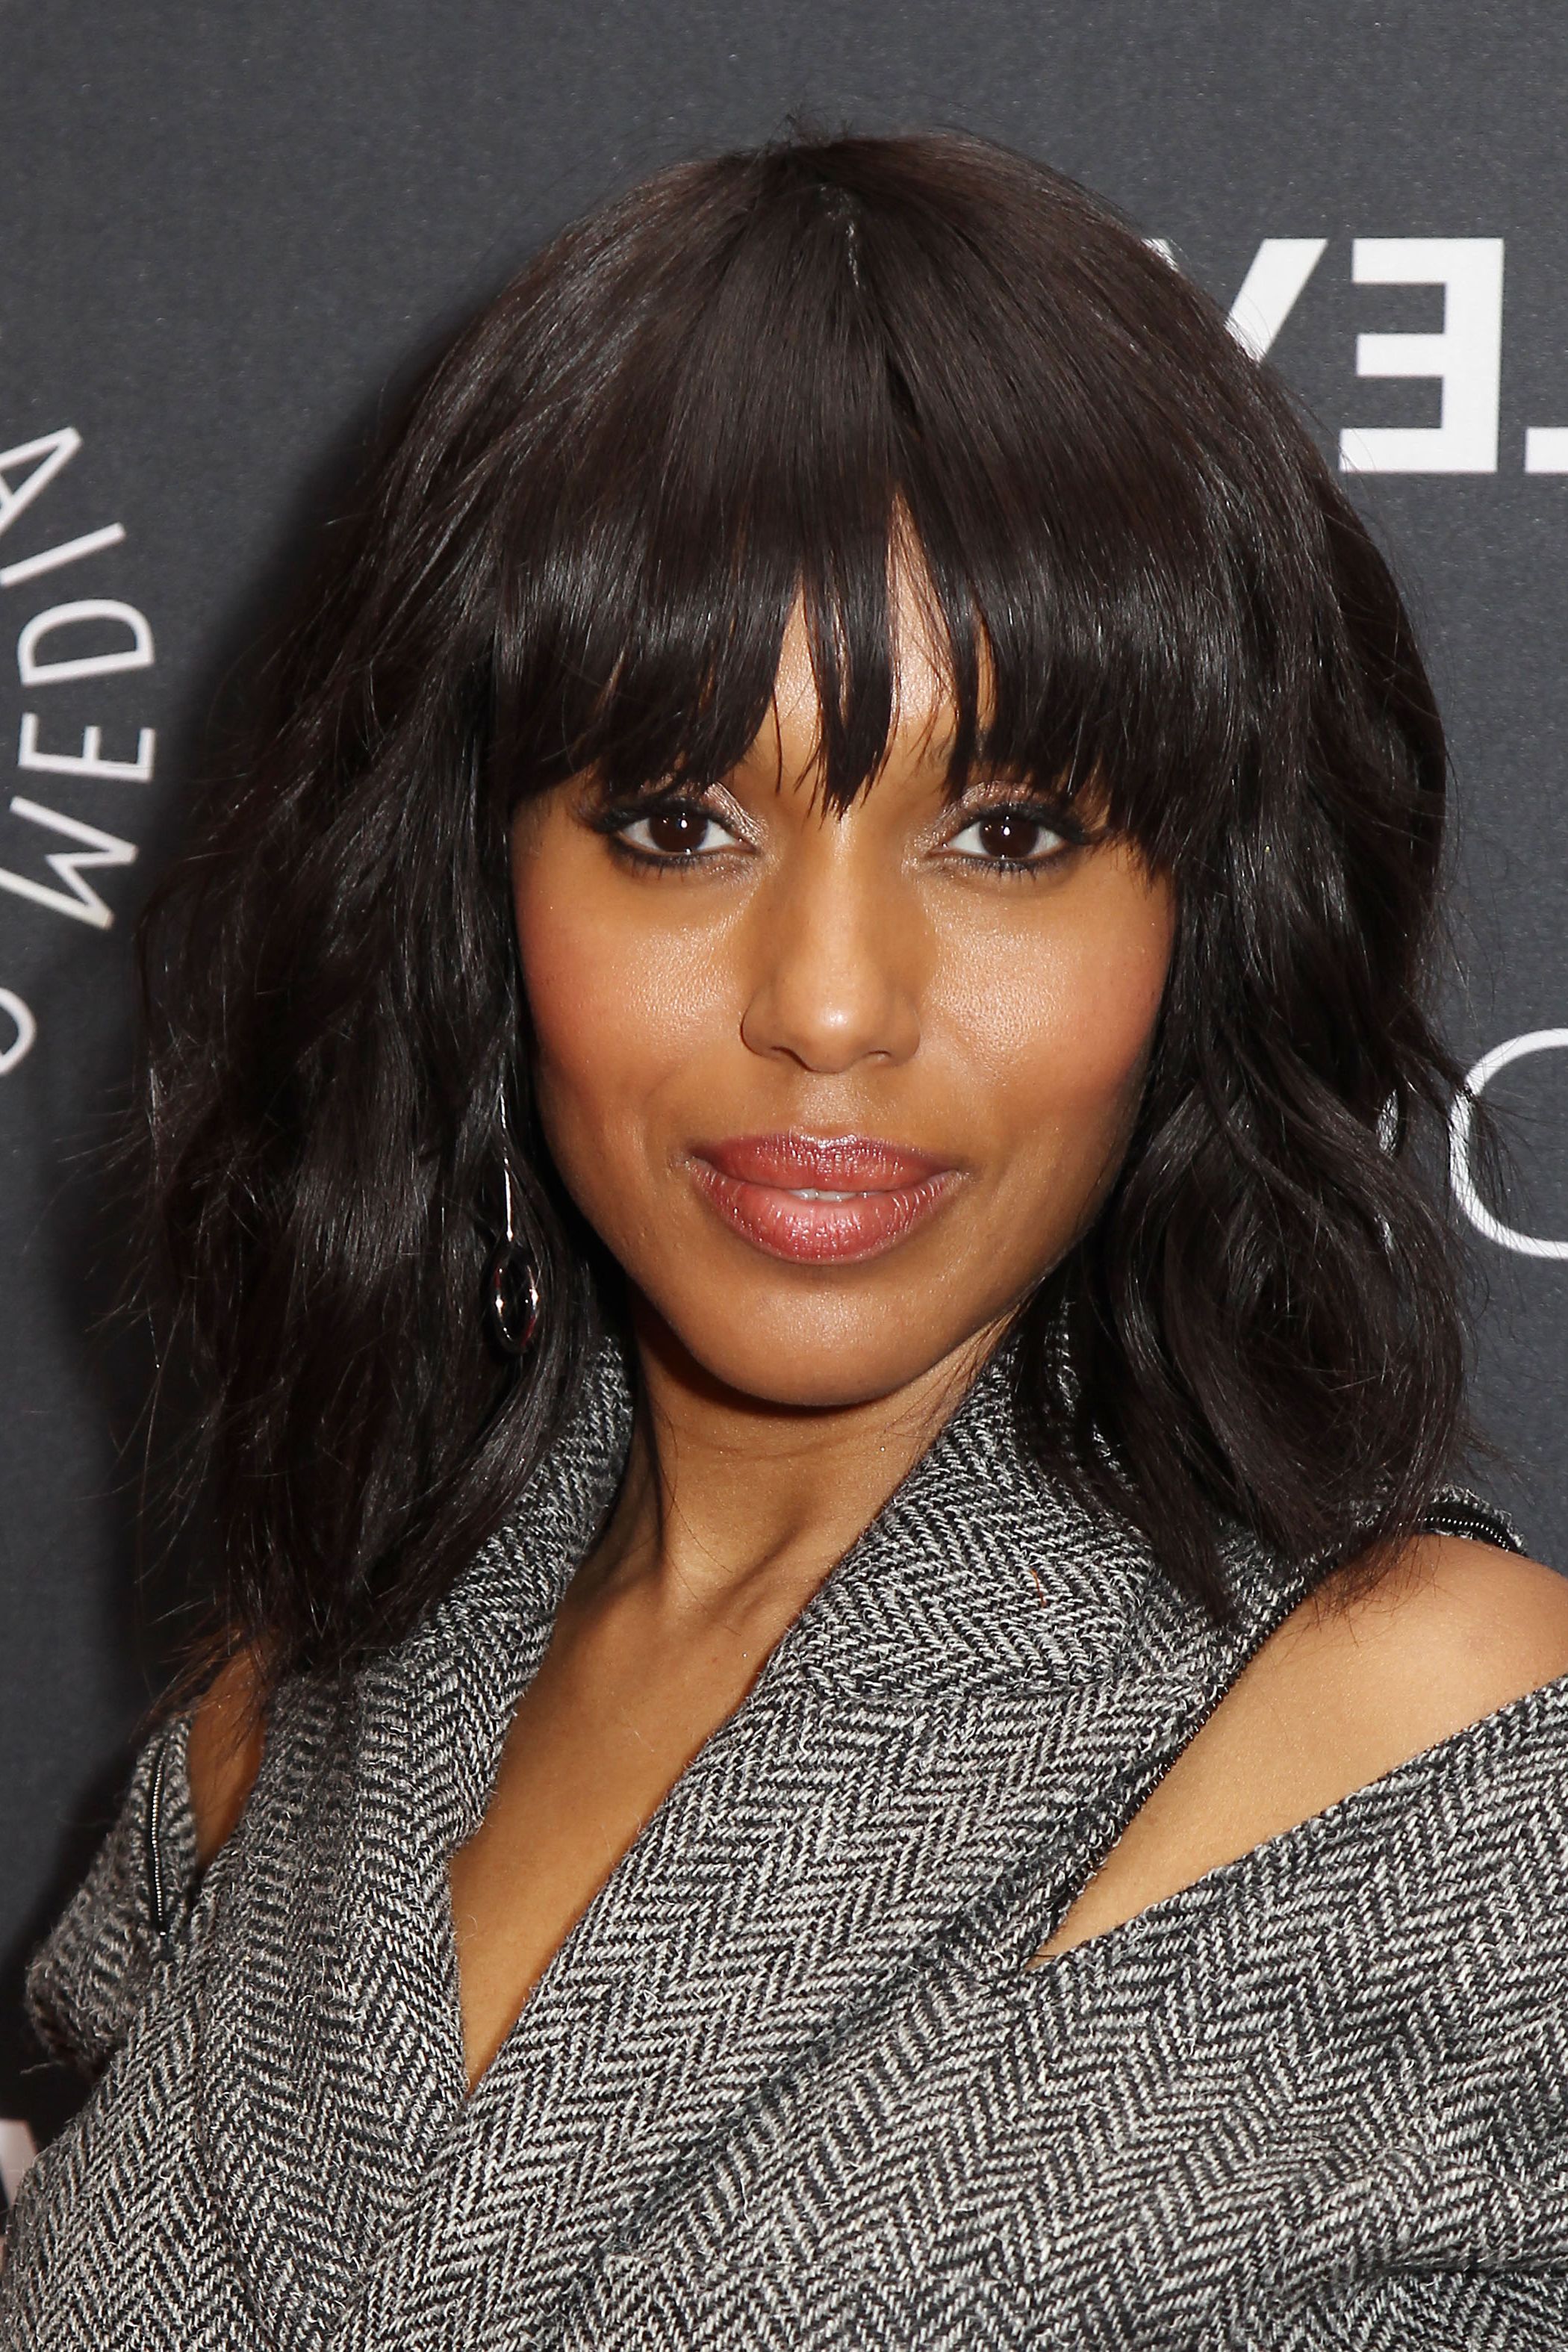 Preferred Shaggy Lob With Arched Bangs Regarding Wavy Hair With Bangs: 7 Star Studded Looks To Try Now (View 9 of 15)